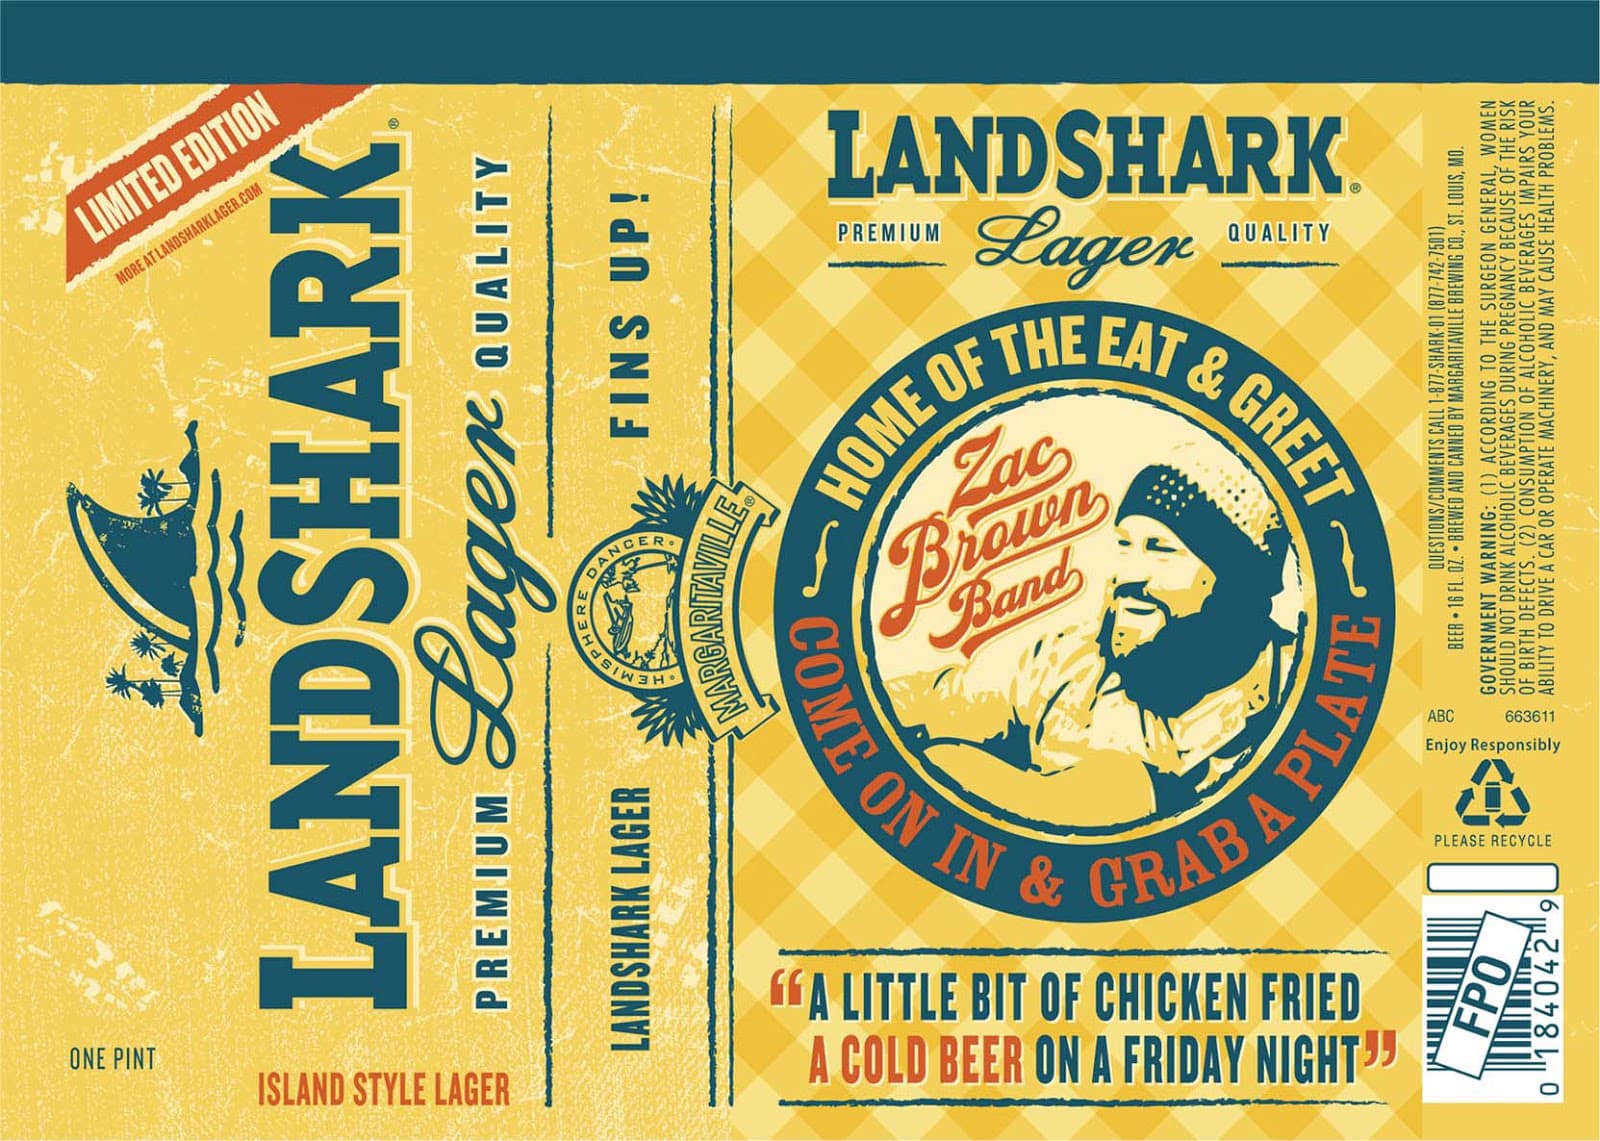 Landshark Lager's New Tune: Zac Brown Band Beer Can